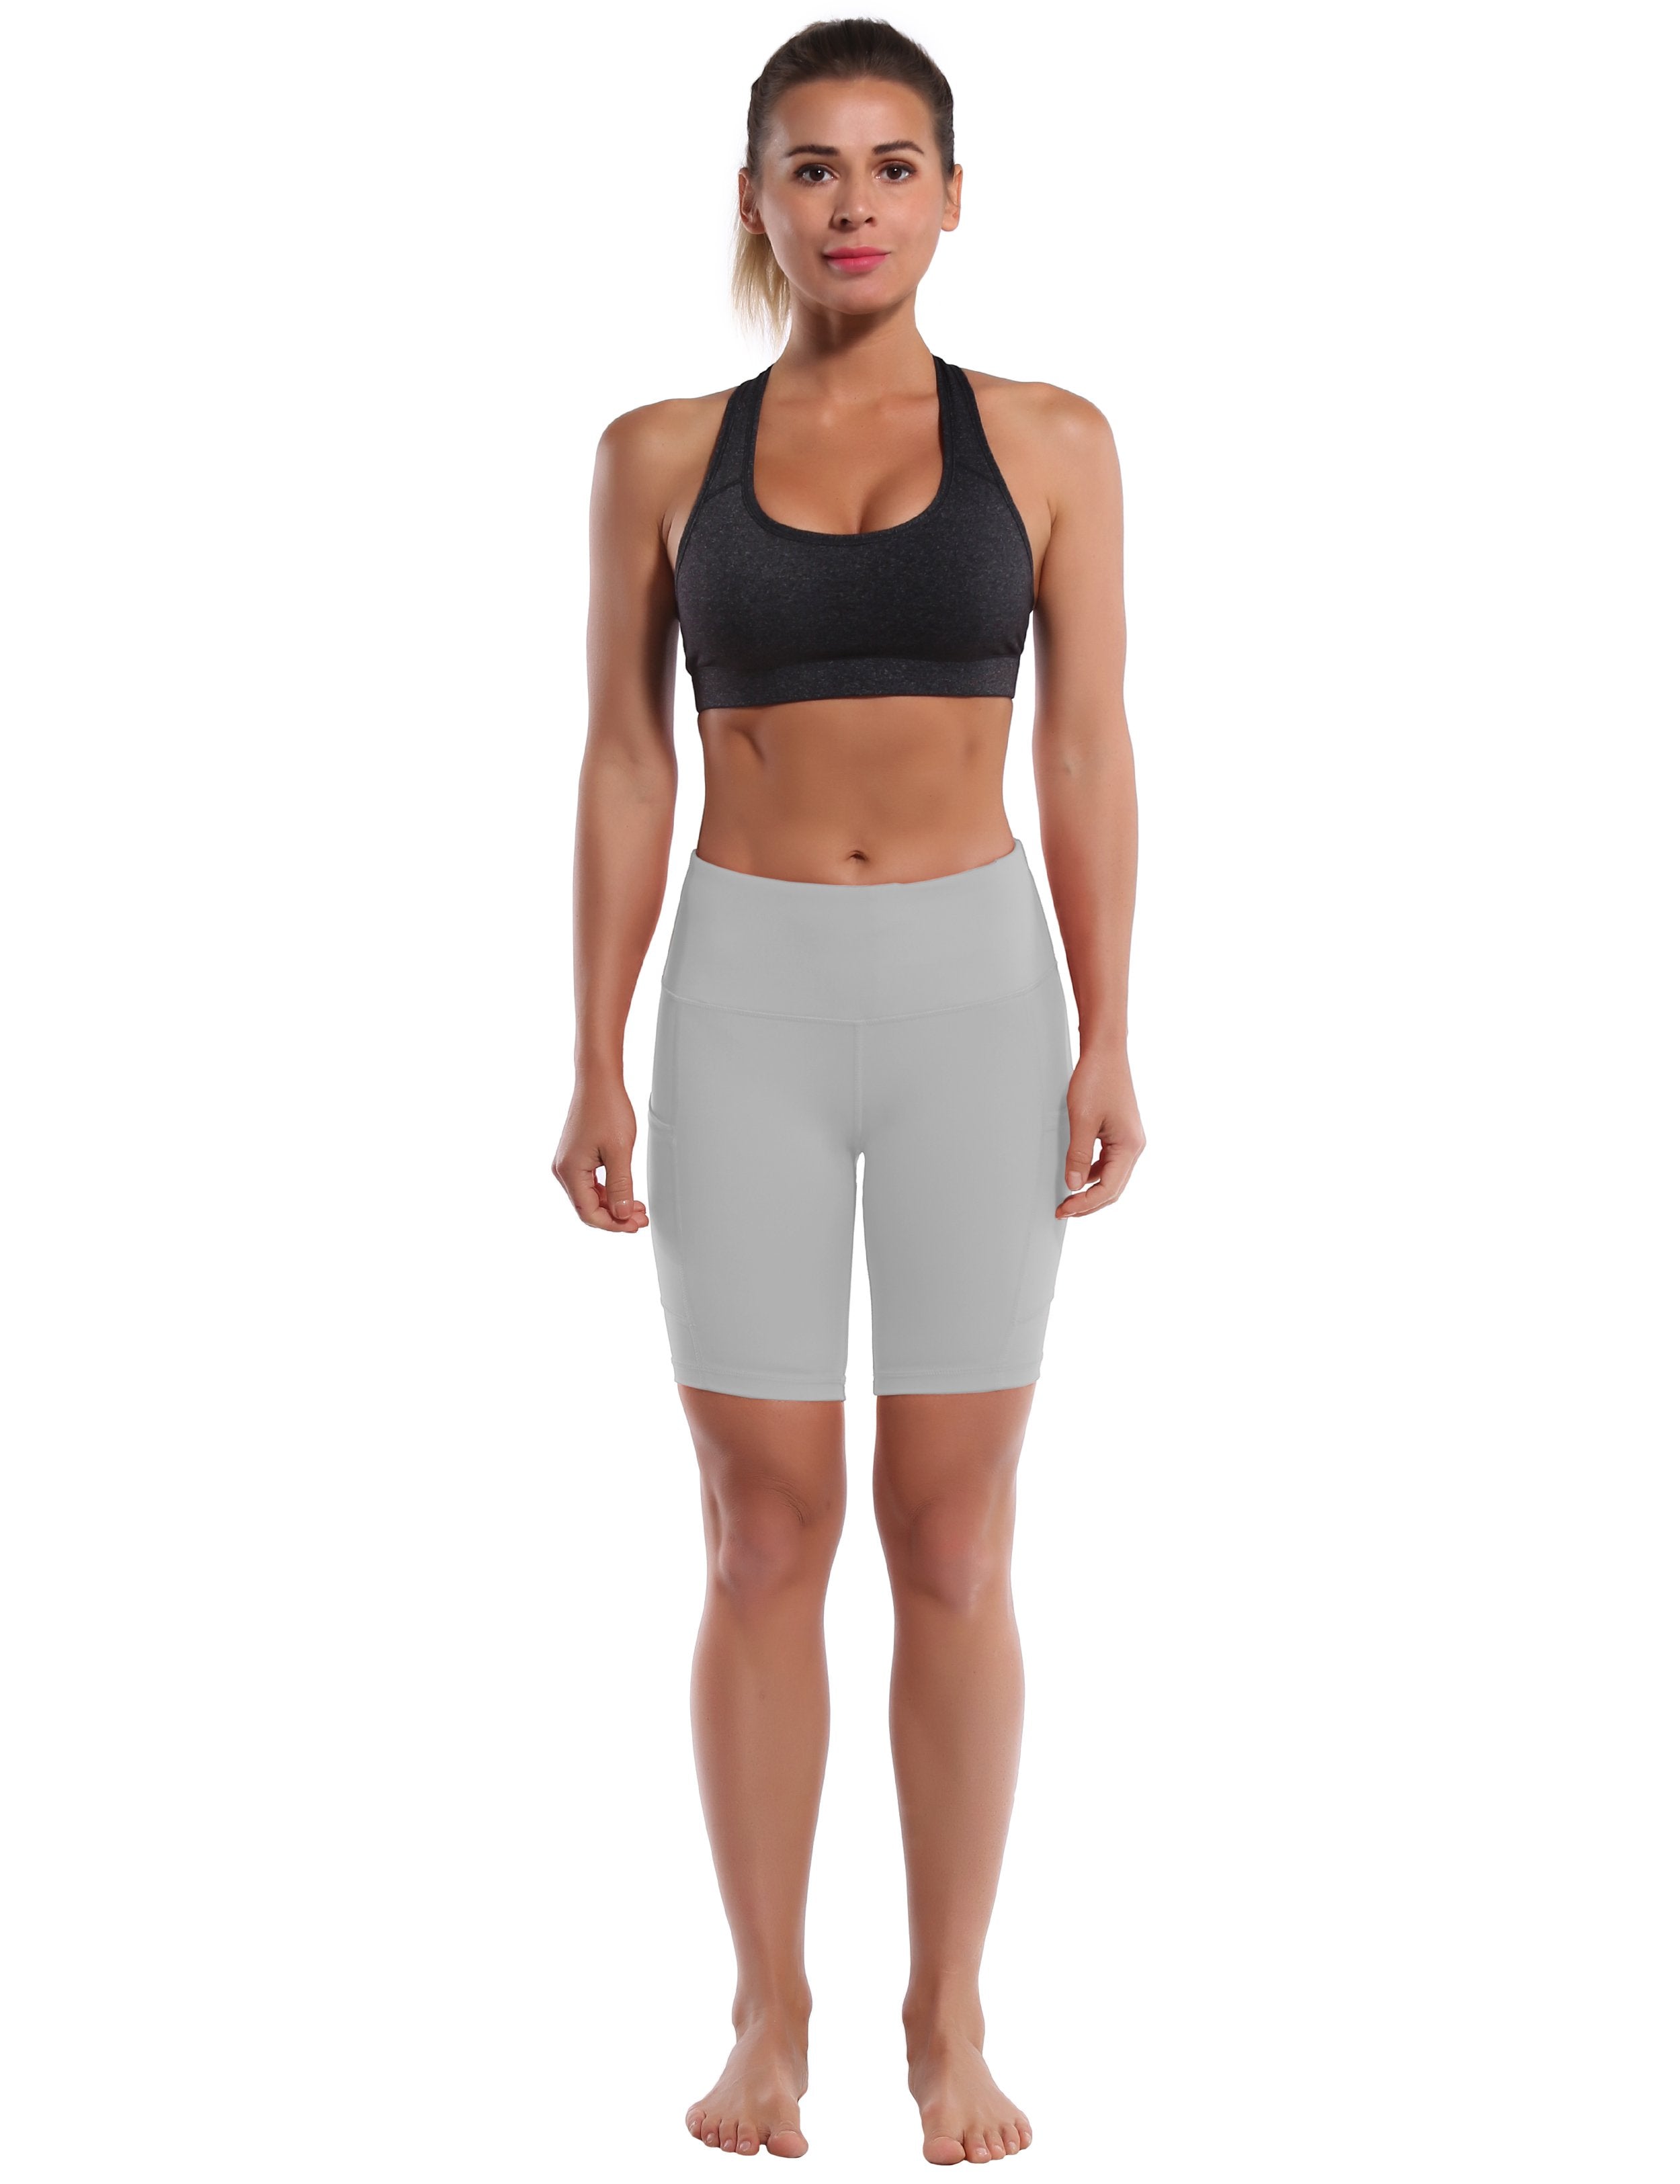 8" Side Pockets Yoga Shorts lightgray Sleek, soft, smooth and totally comfortable: our newest style is here. Softest-ever fabric High elasticity High density 4-way stretch Fabric doesn't attract lint easily No see-through Moisture-wicking Machine wash 75% Nylon, 25% Spandex